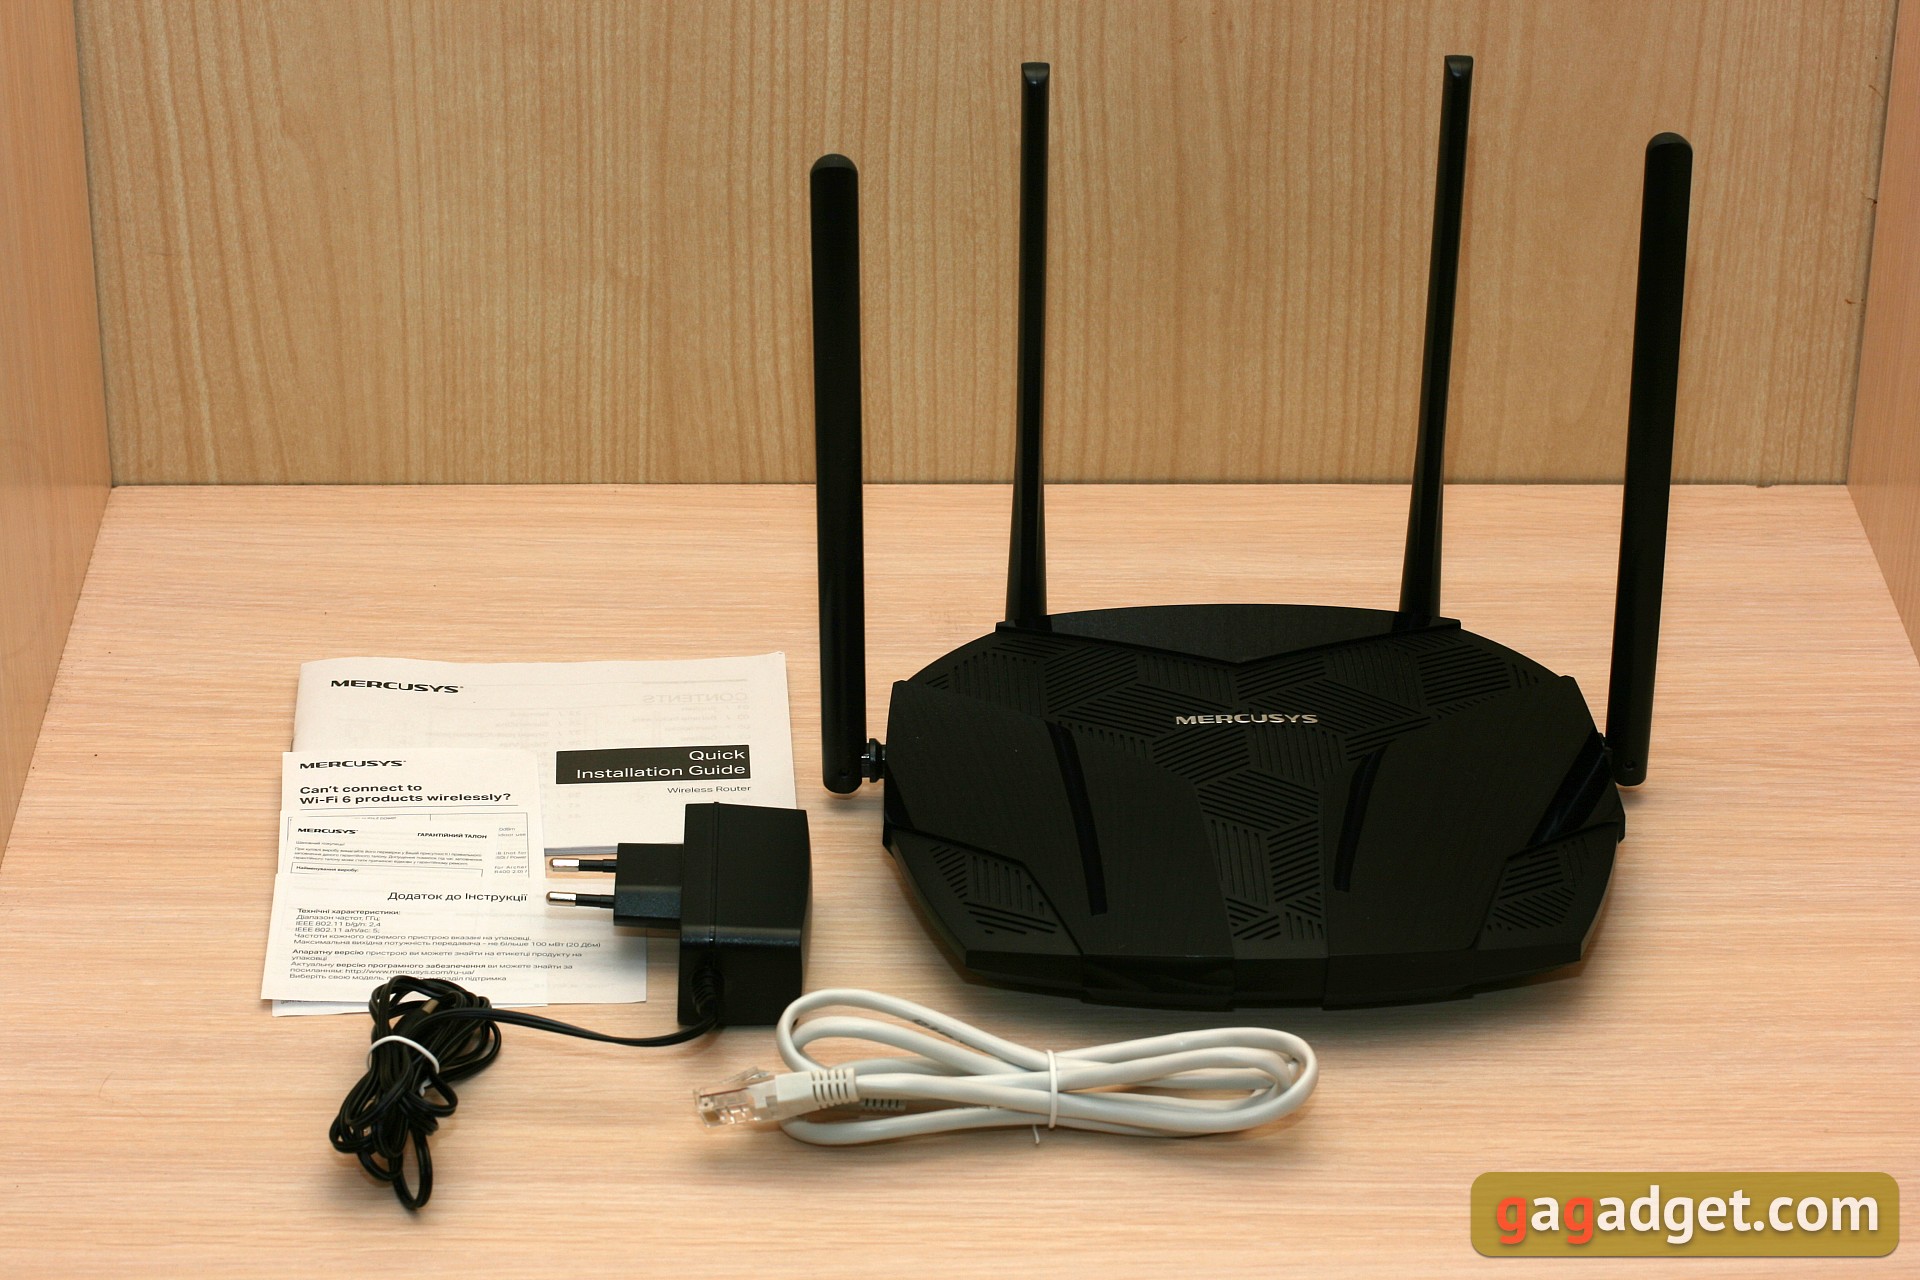 Mercusys MR70X review: the most affordable Gigabit router with Wi-Fi 6-3